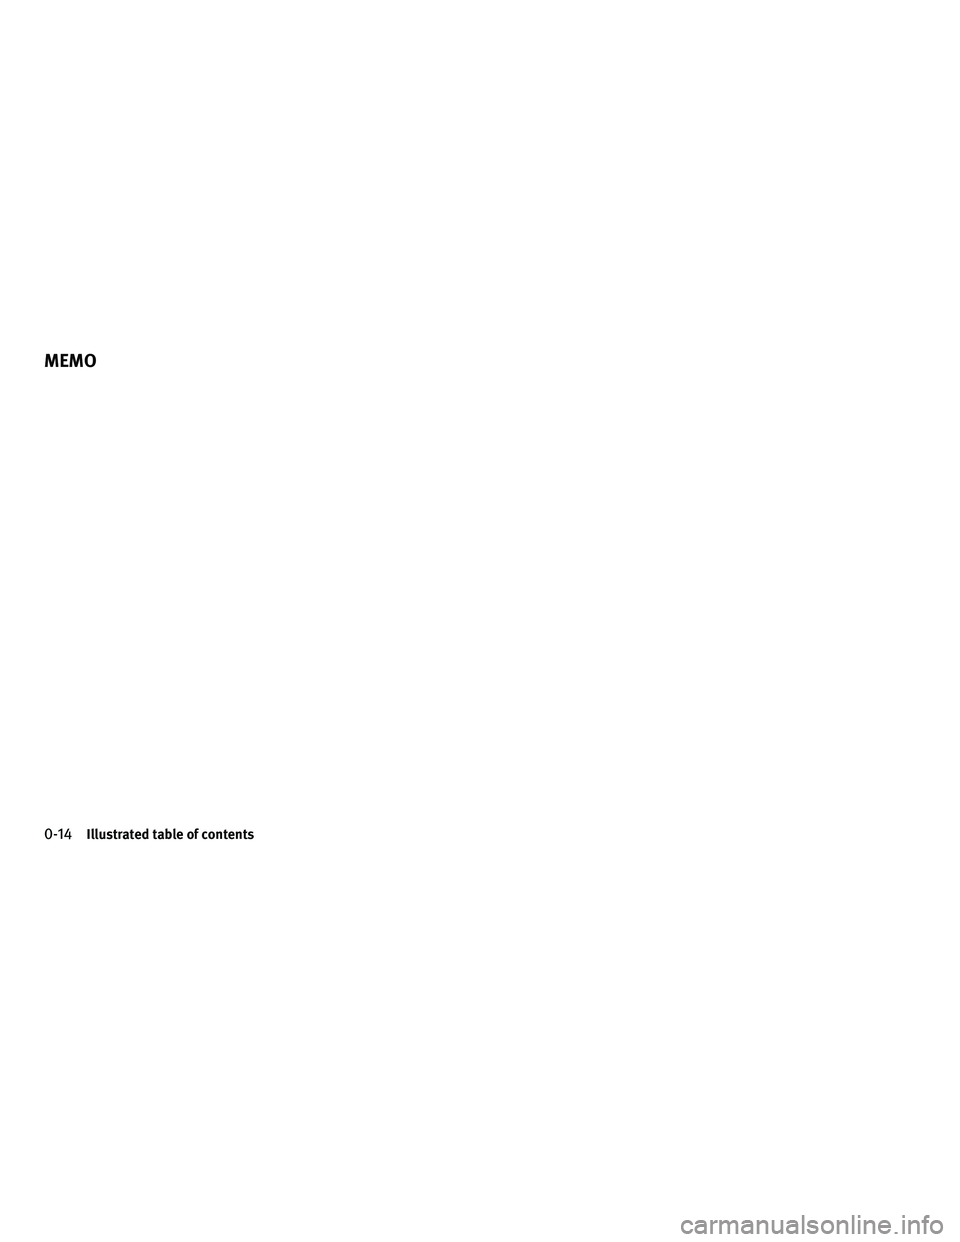 INFINITI M 2010 Owners Manual 0-14Illustrated table of contents
MEMO 